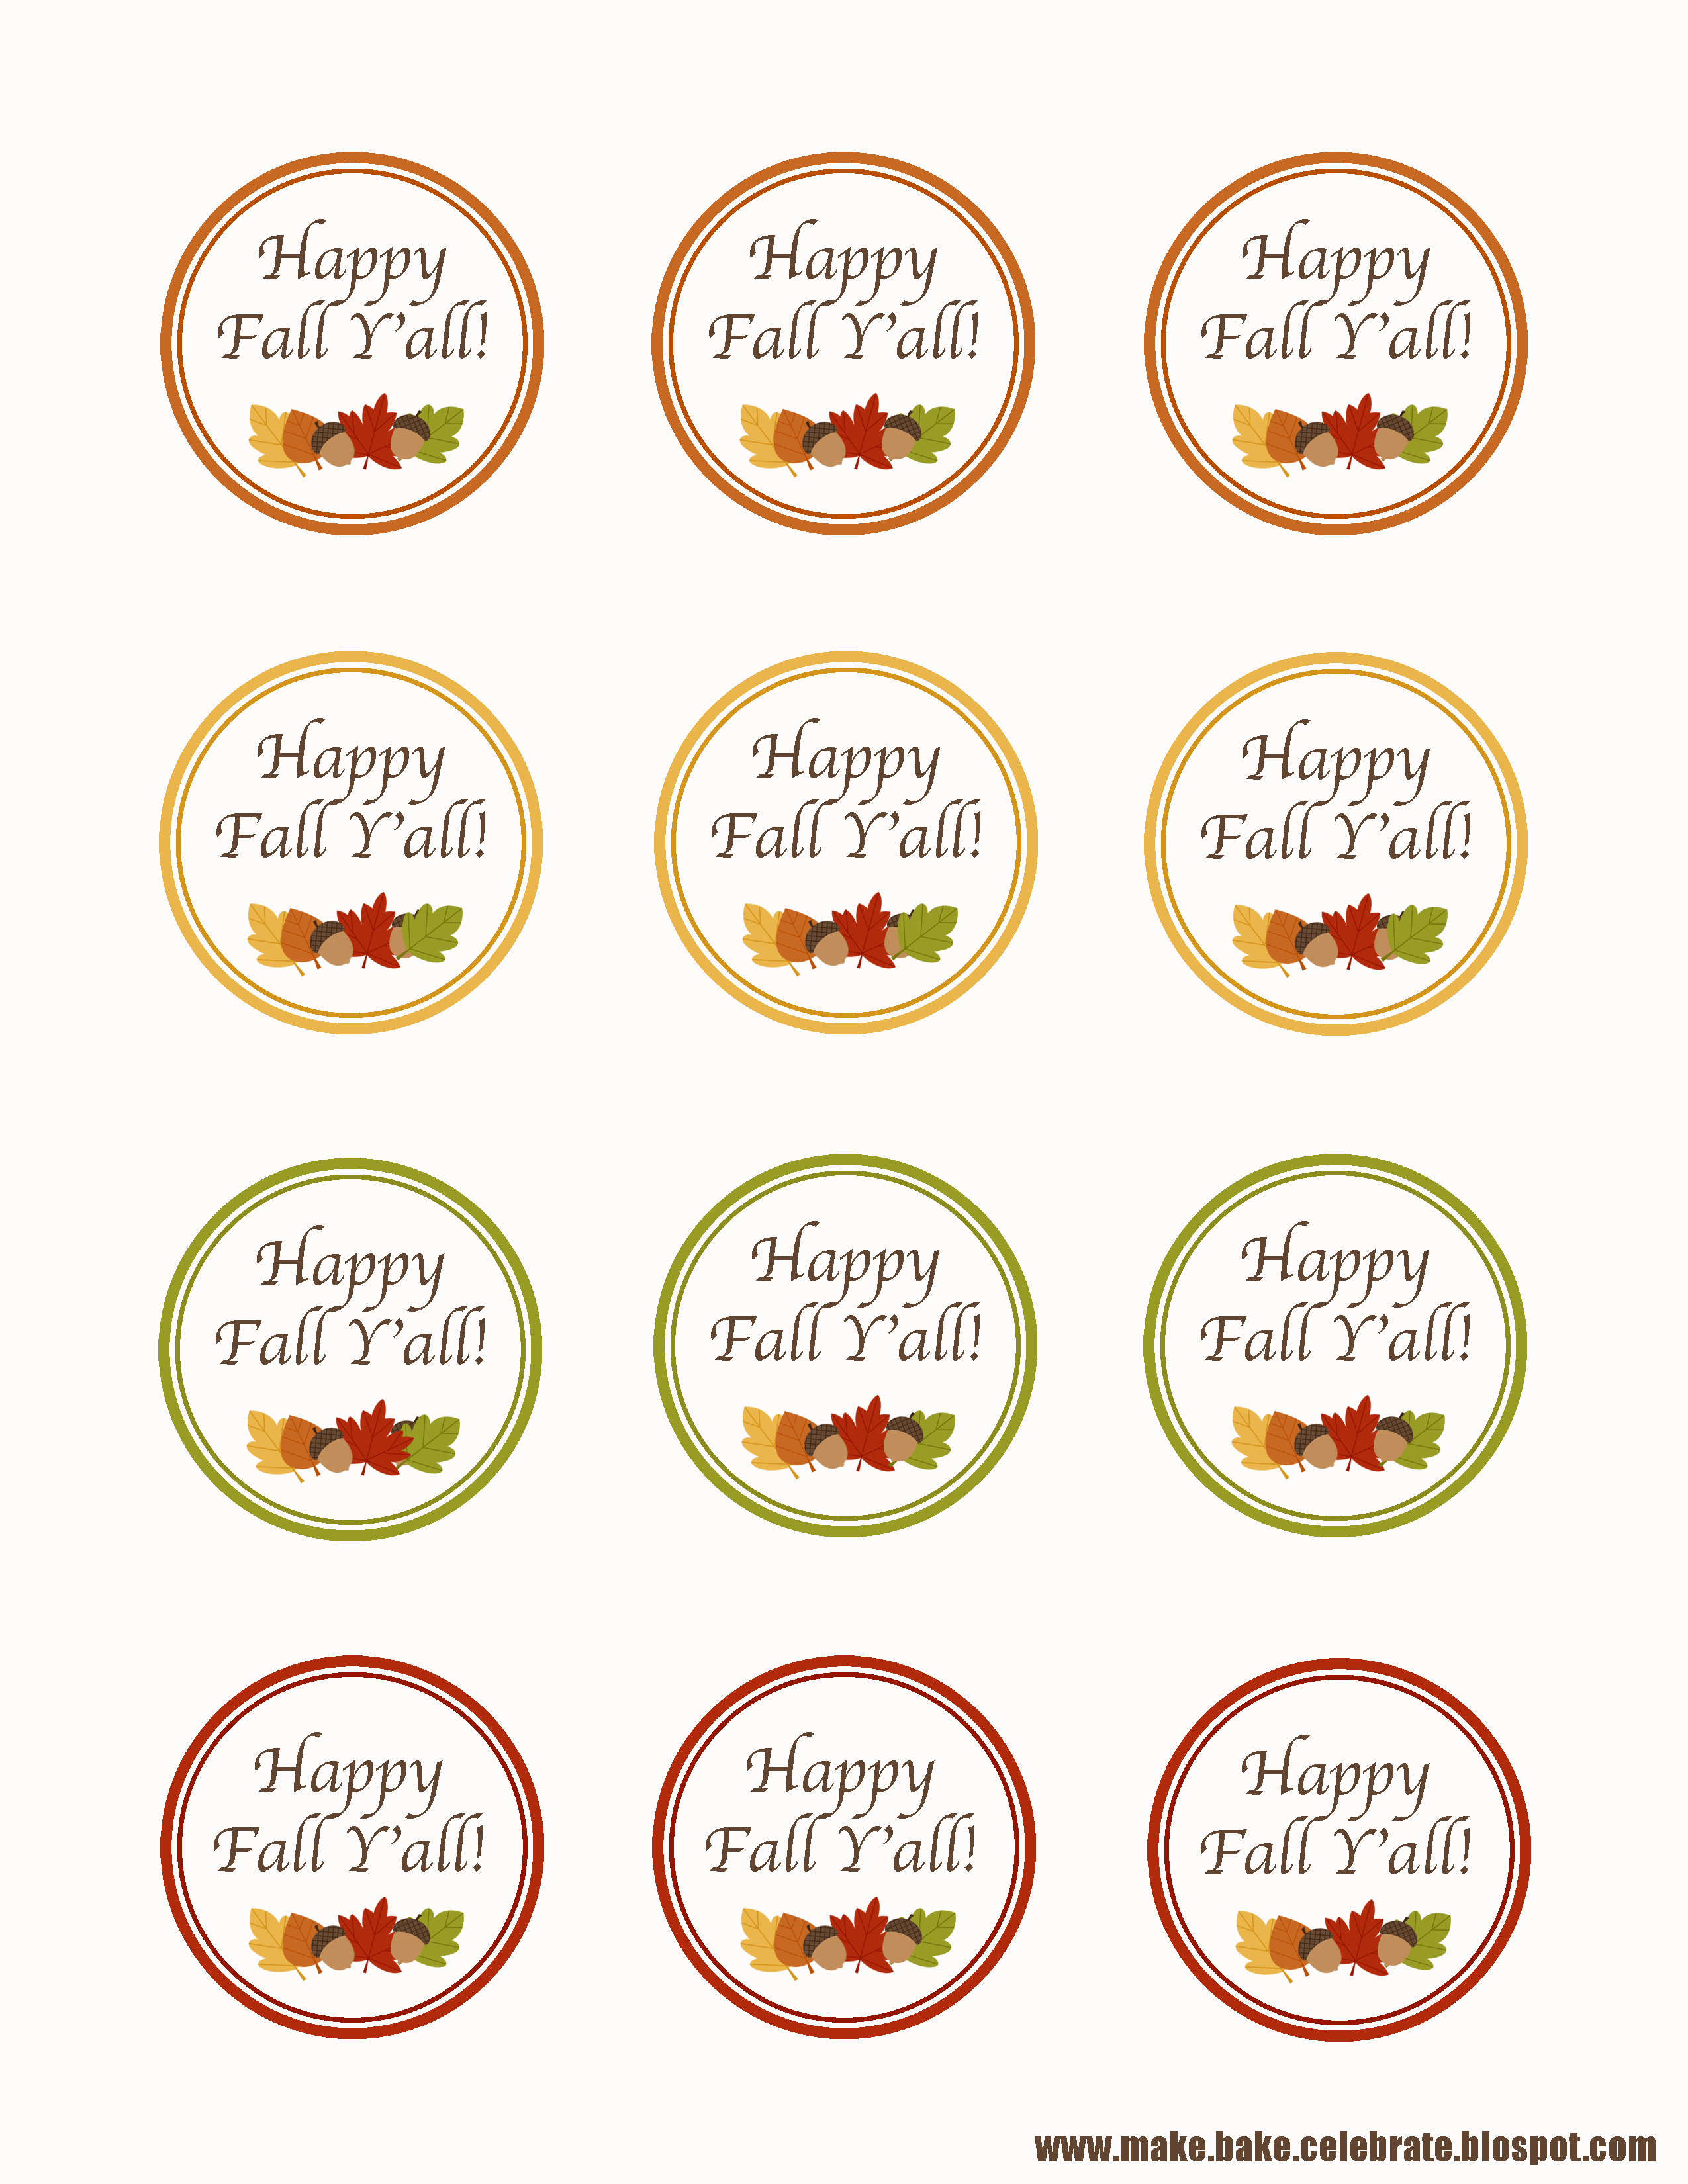 Acorn Candy Kisses with Fall Gift Tag Printable Happy Fall, Gift Tags